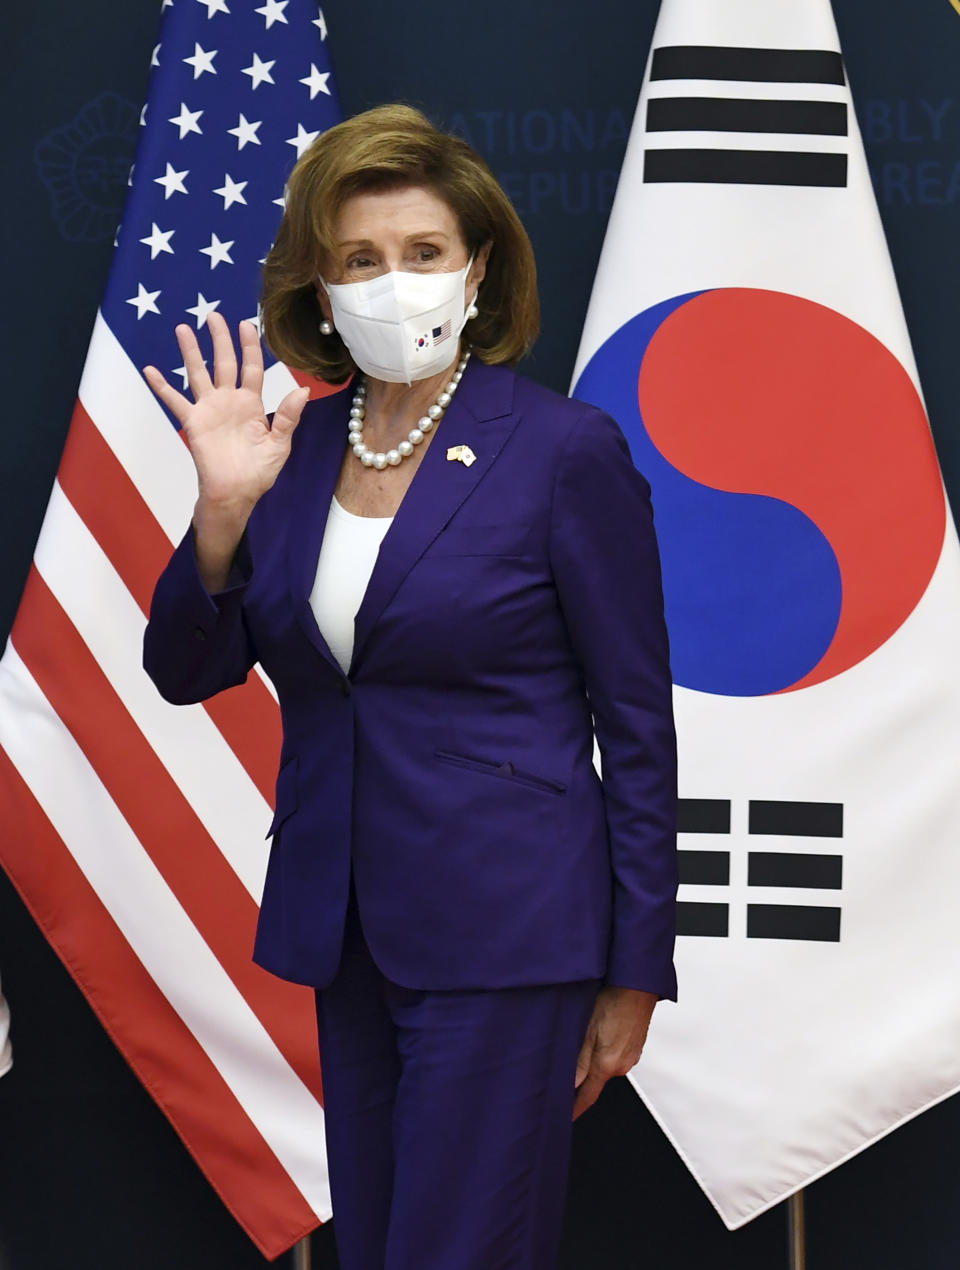 U.S. House Speaker Nancy Pelosi waves to media after a joint press announcement with South Korean National Assembly Speaker Kim Jin Pyo at the National Assembly in Seoul, Thursday, Aug. 4, 2022. (Kim Min-Hee/Pool Photo via AP)